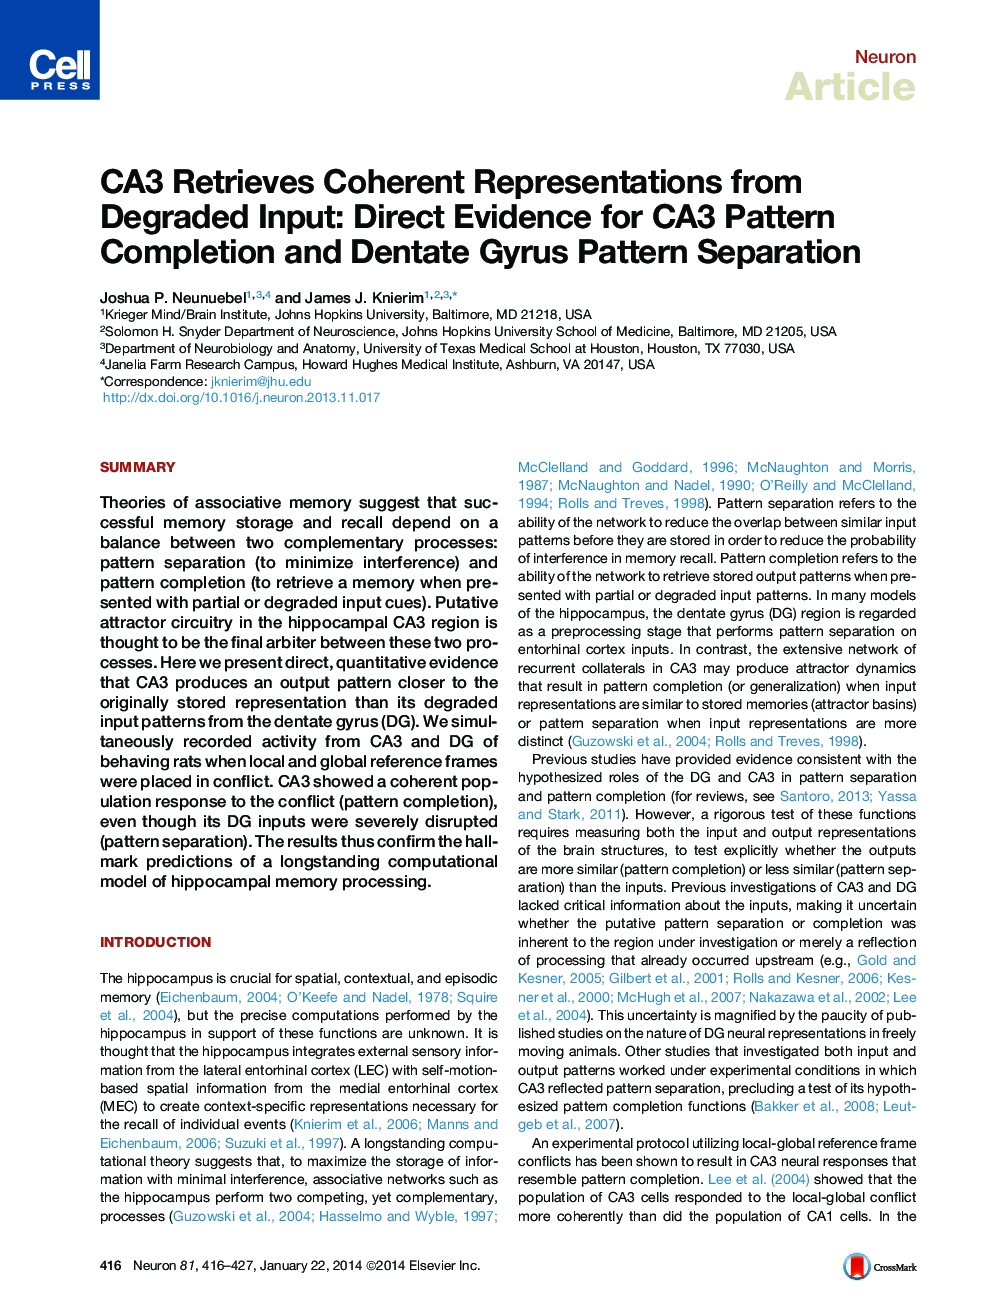 CA3 Retrieves Coherent Representations from Degraded Input: Direct Evidence for CA3 Pattern Completion and Dentate Gyrus Pattern Separation